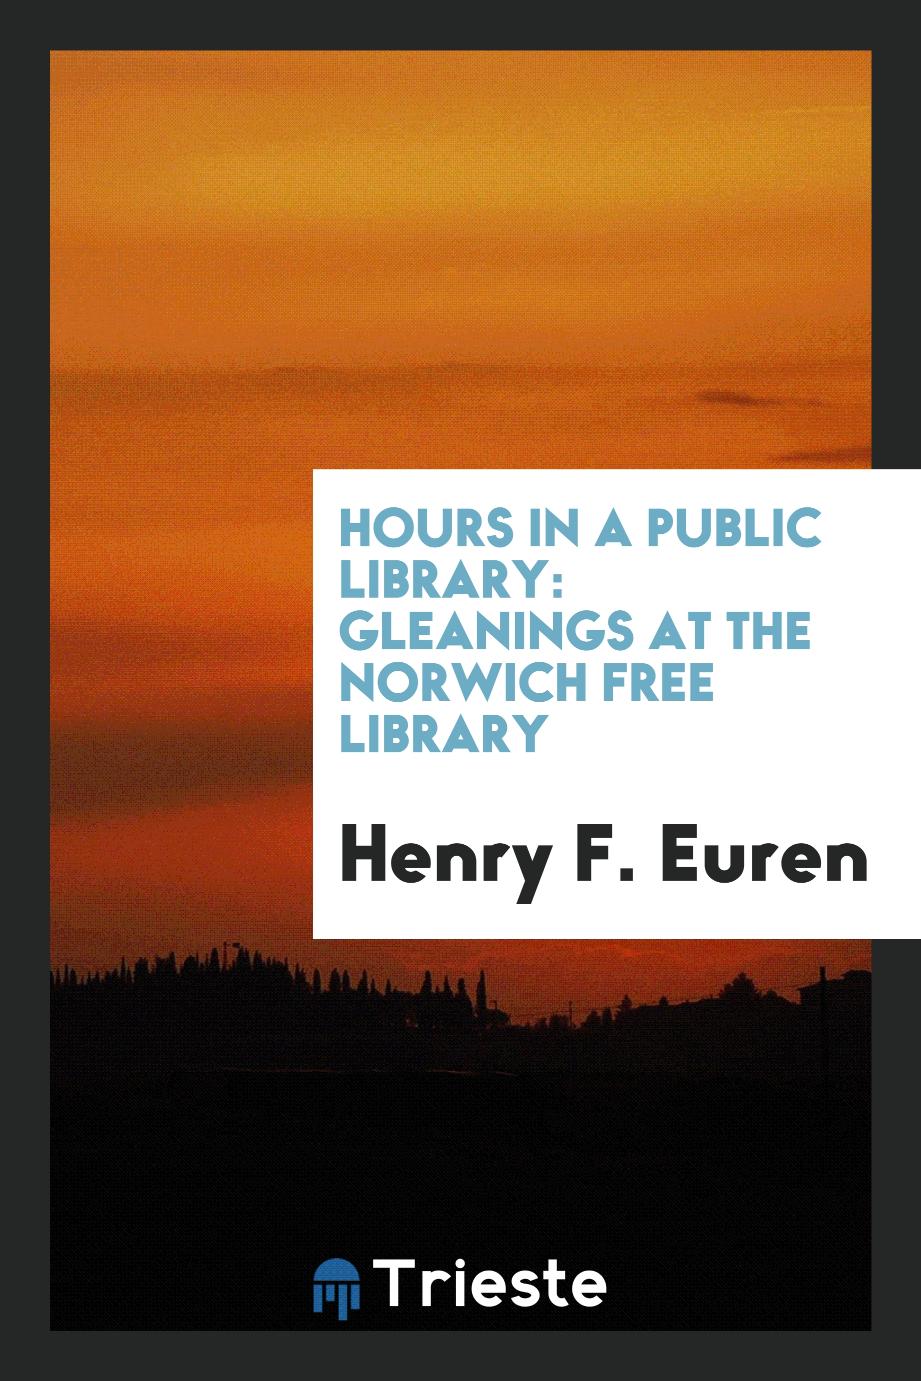 Hours in a Public Library: Gleanings at the Norwich Free Library